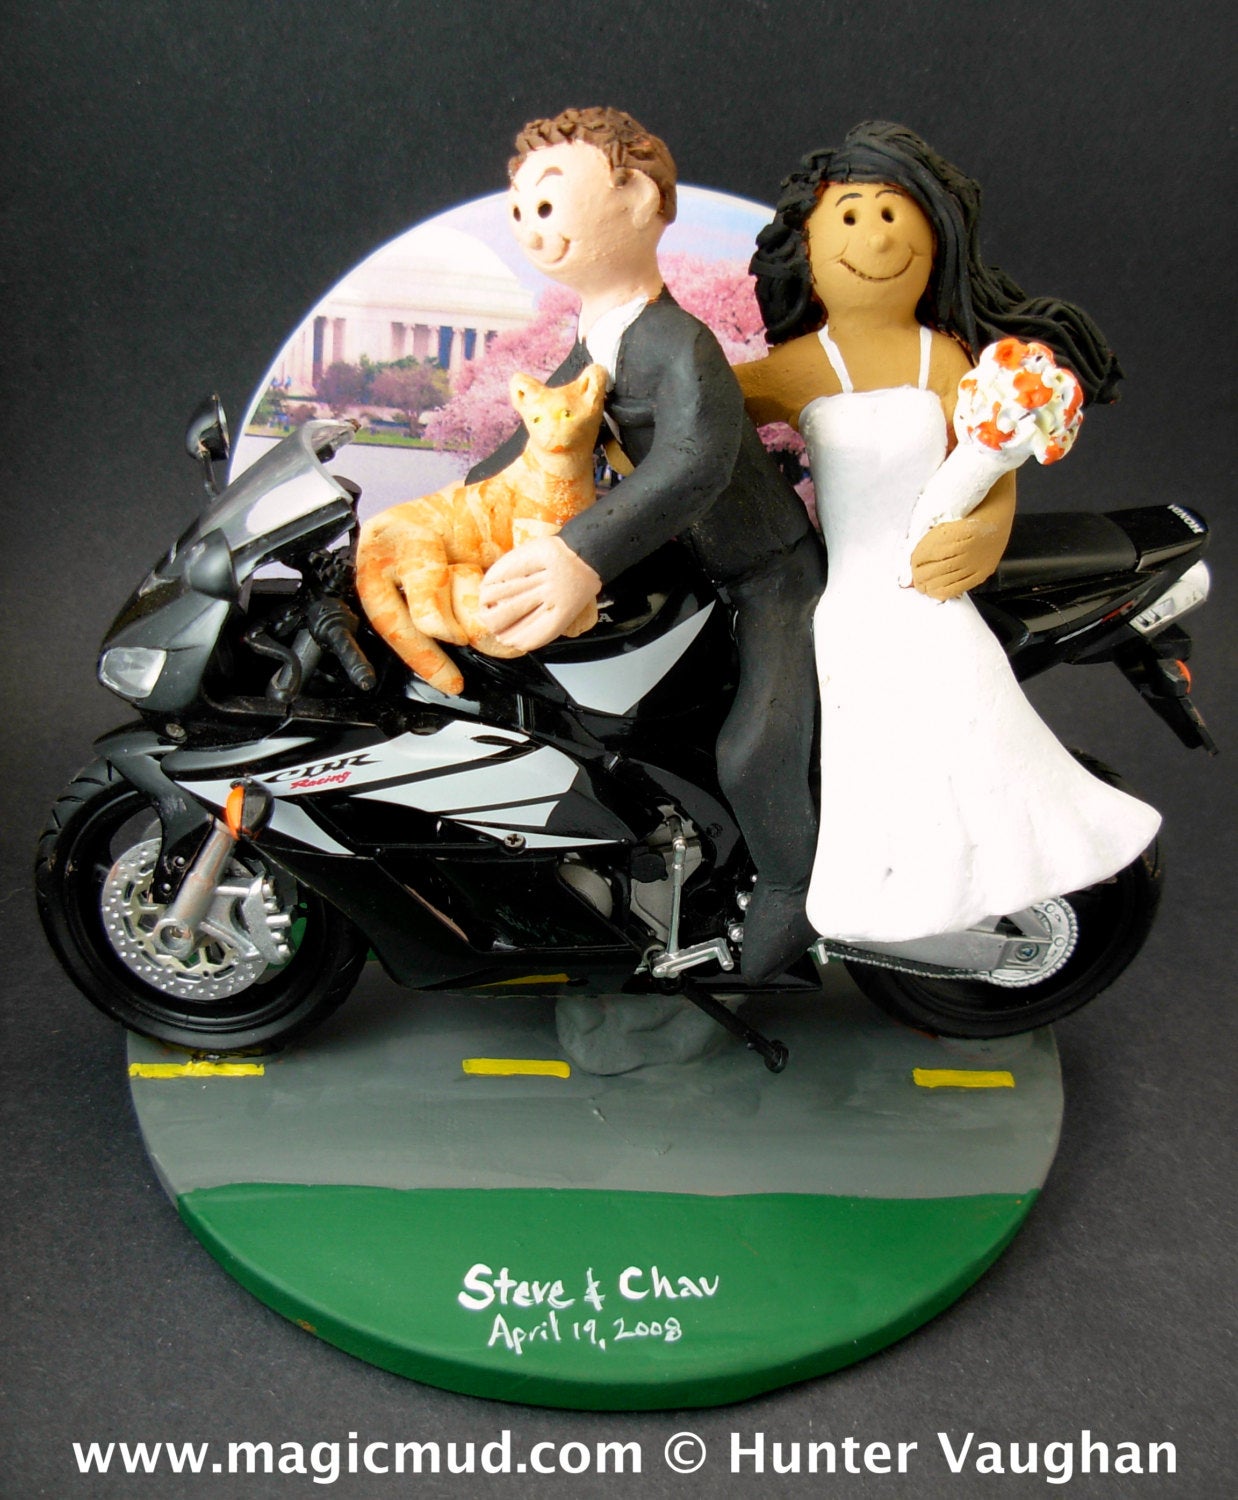 Sportbike Motorcycle for Bride and Groom Wedding Cake Topper,  Motorcycle Wedding Cake Topper, Motorcycle Riders Wedding Cake Topper - iWeddingCakeToppers